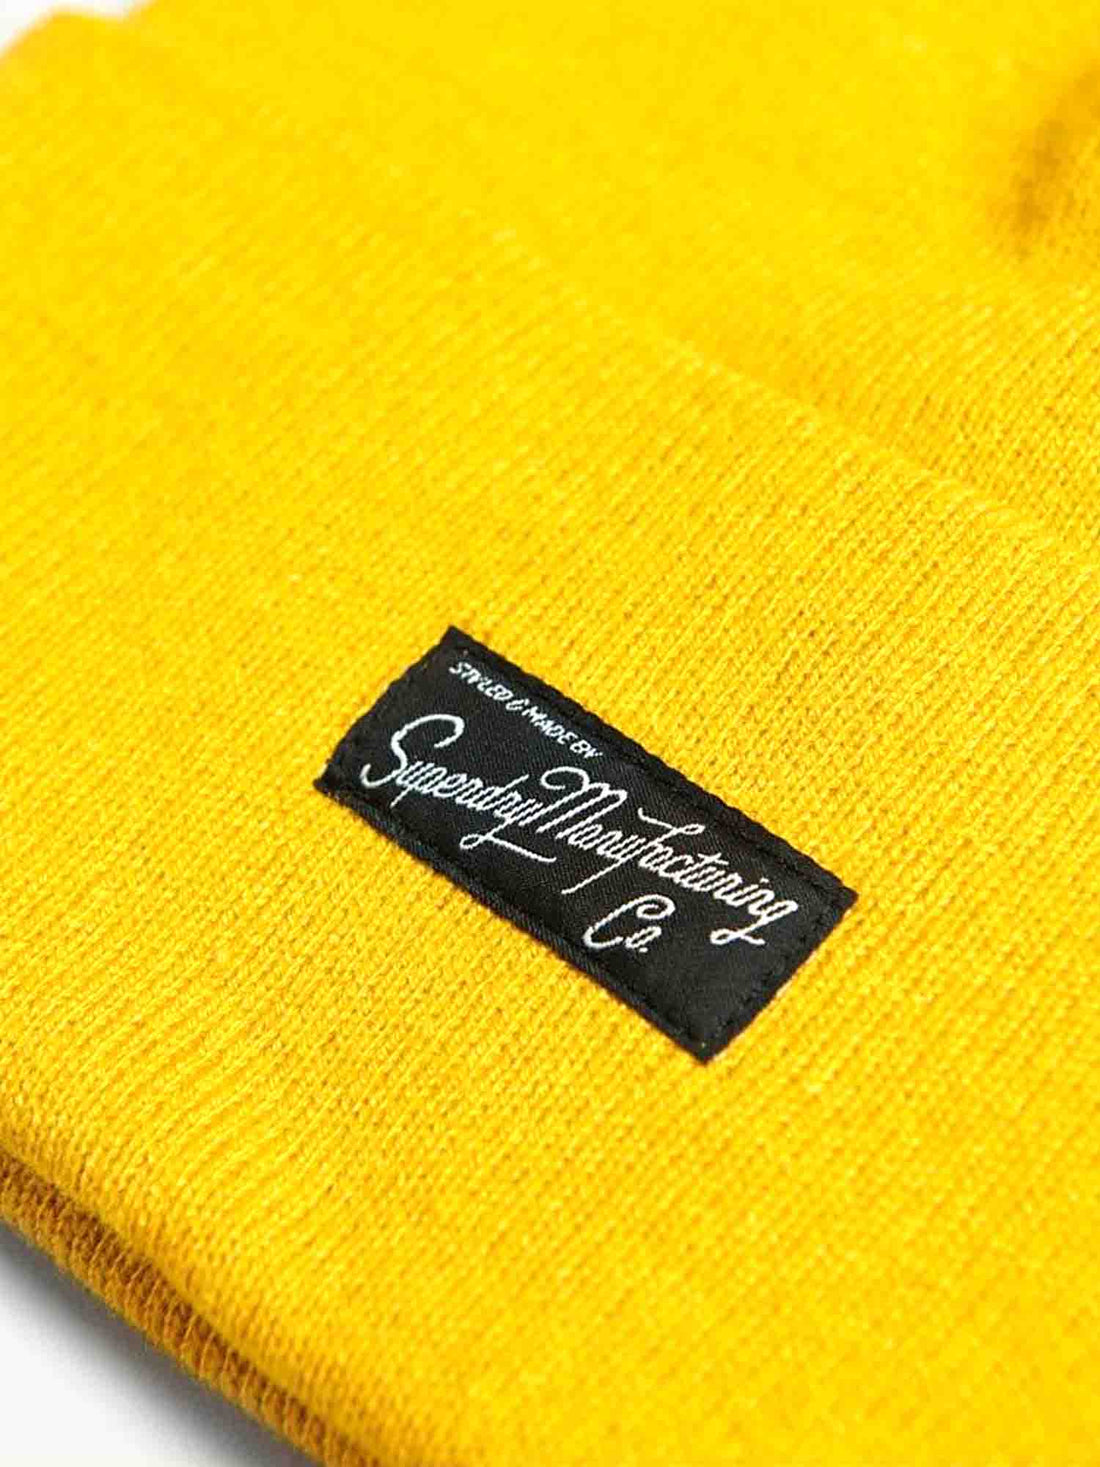 Cappelli Giallo Superdry